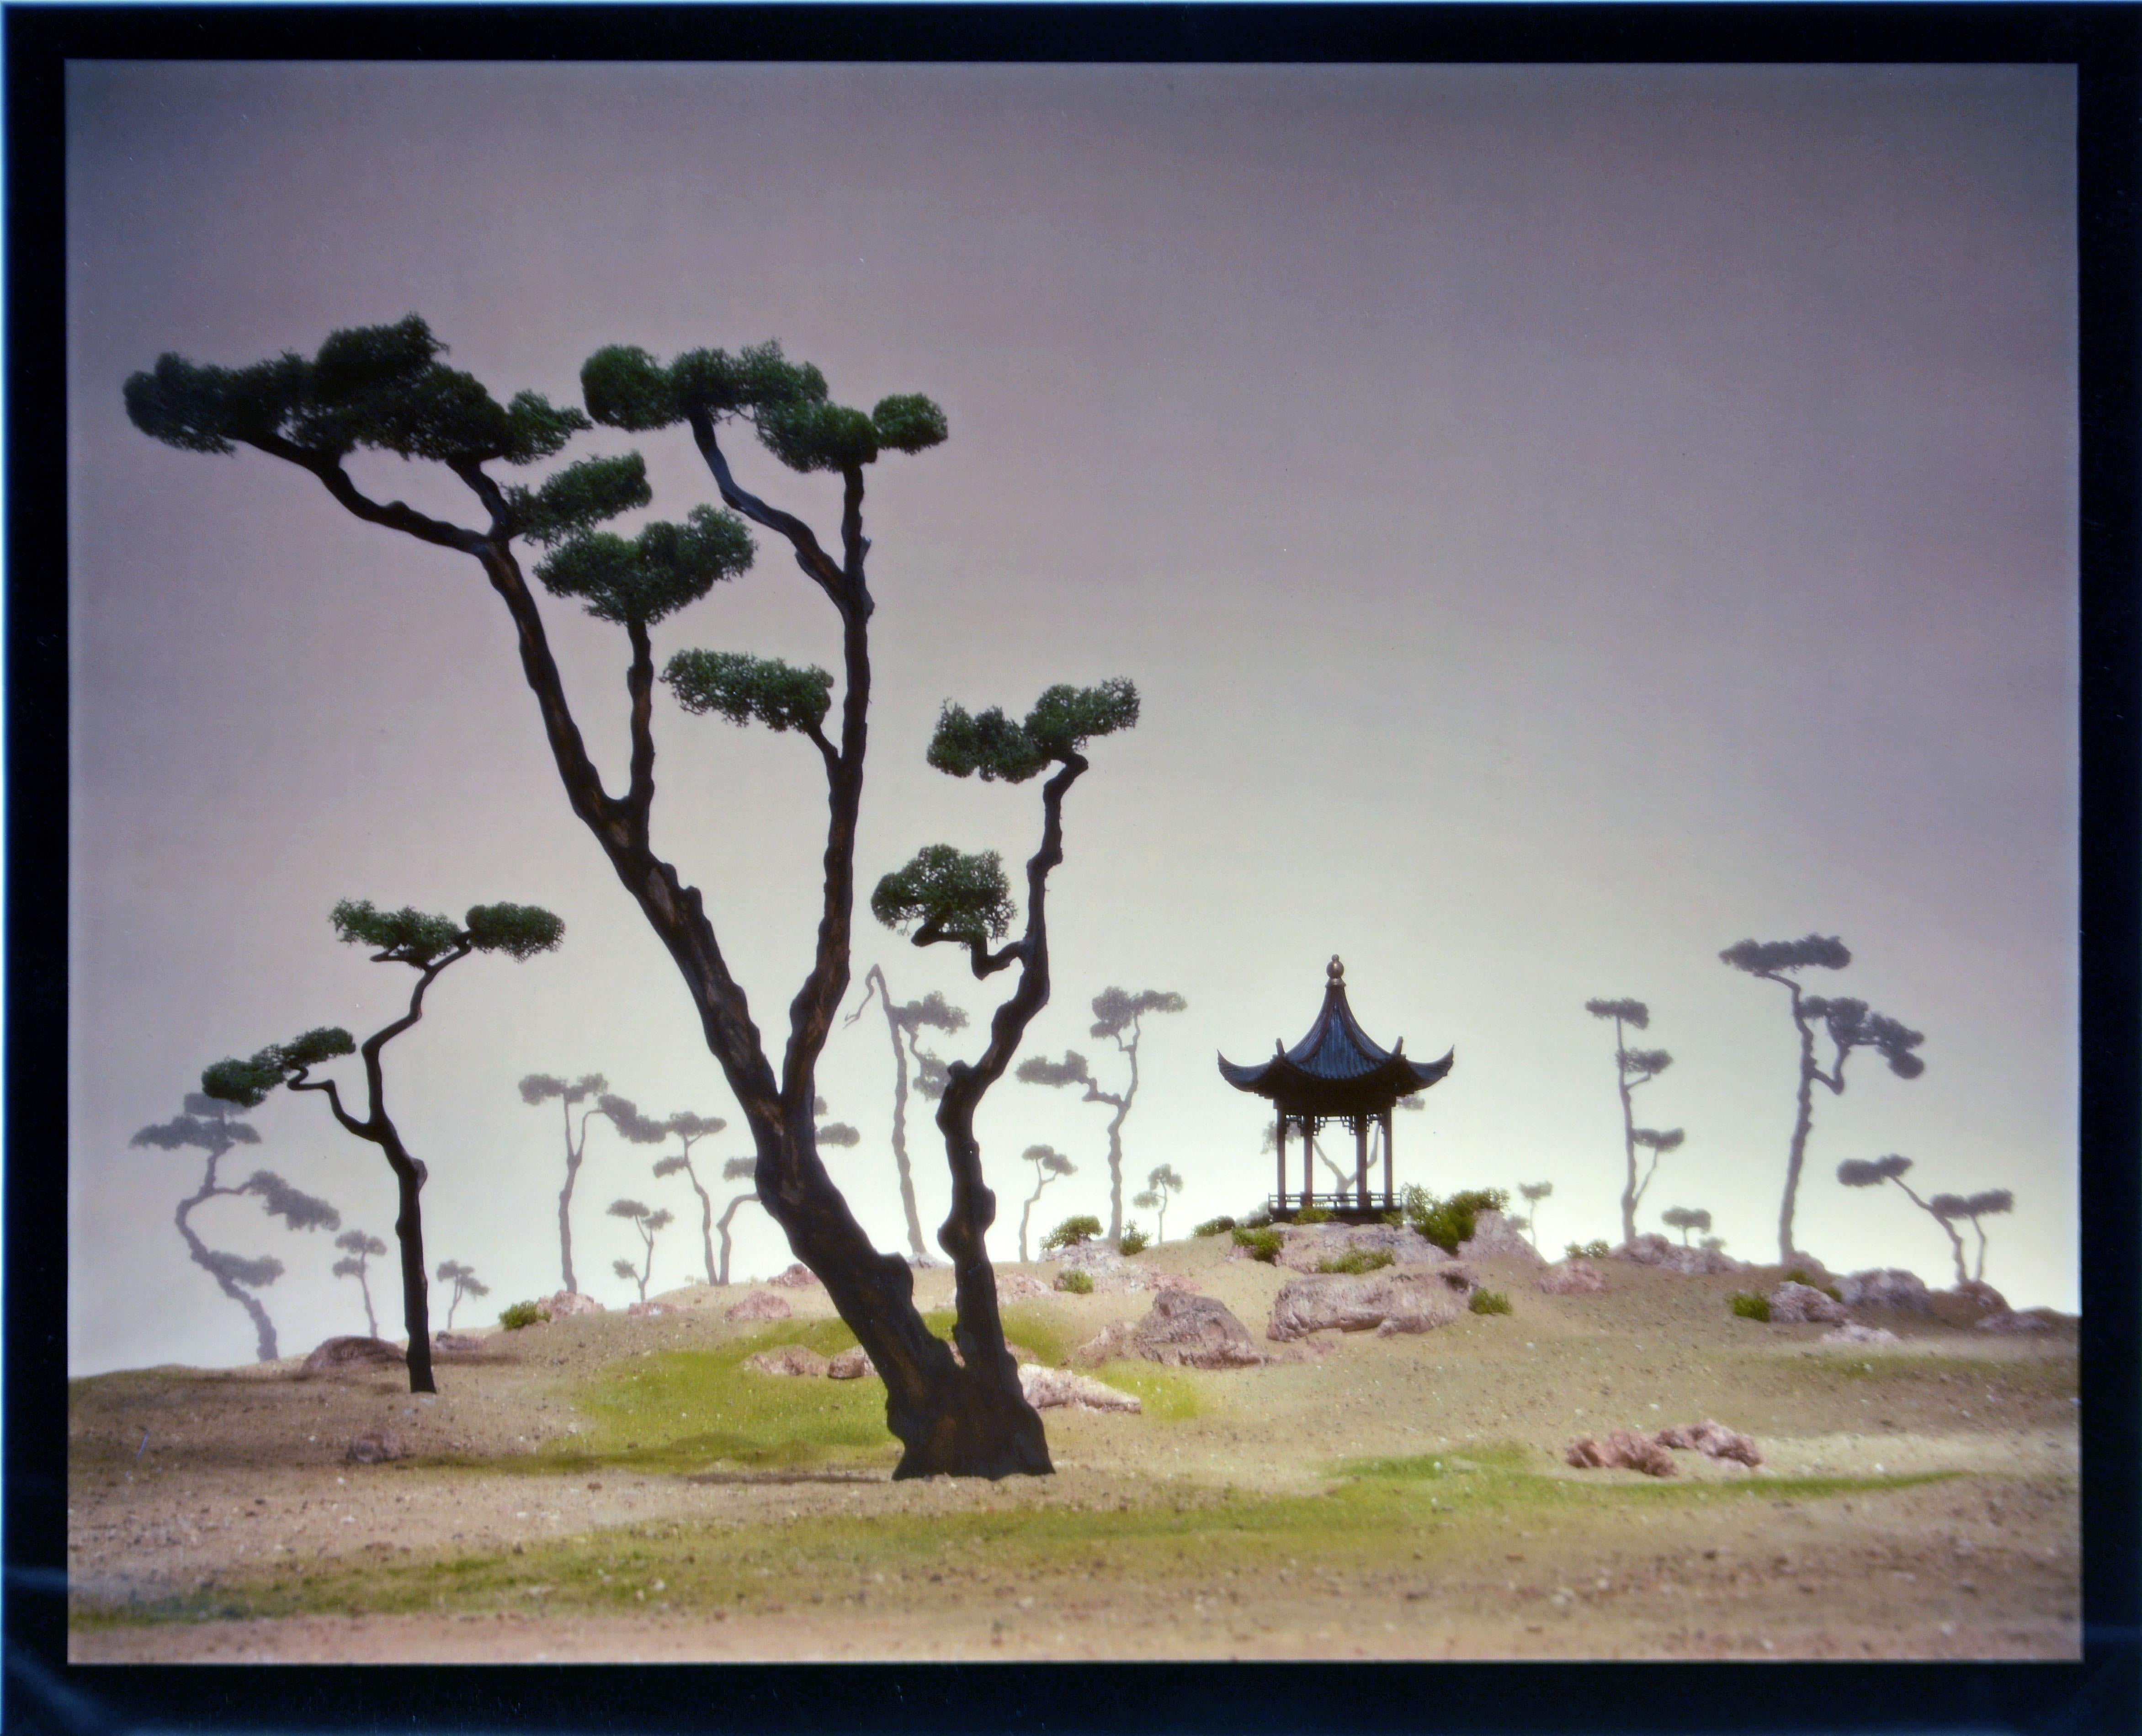 Didier Massard (French. b. 1953).
Landscape with Chinese Pavilion.
Cibachrome Print (Ilfochrome Classic). Image: 15 x 18.75 in / 38 x 48 cm, full margins. Frame: 21.25 x 27.25 in / 54 x 69.5 cm.
Signed on verso, inscribed on back